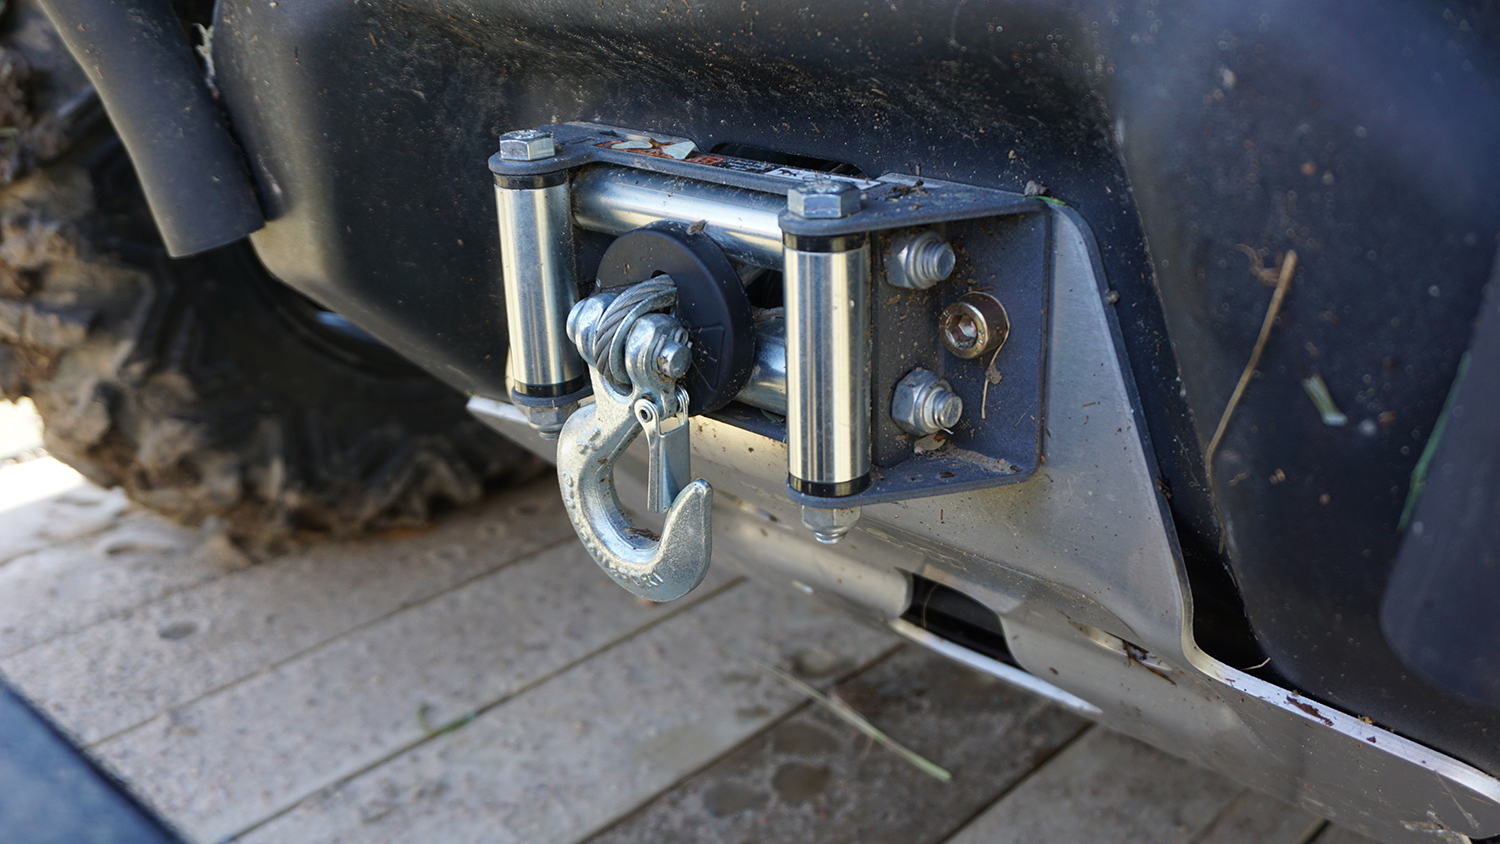 A good winch can save the day. Here's how to keep yours running properly.